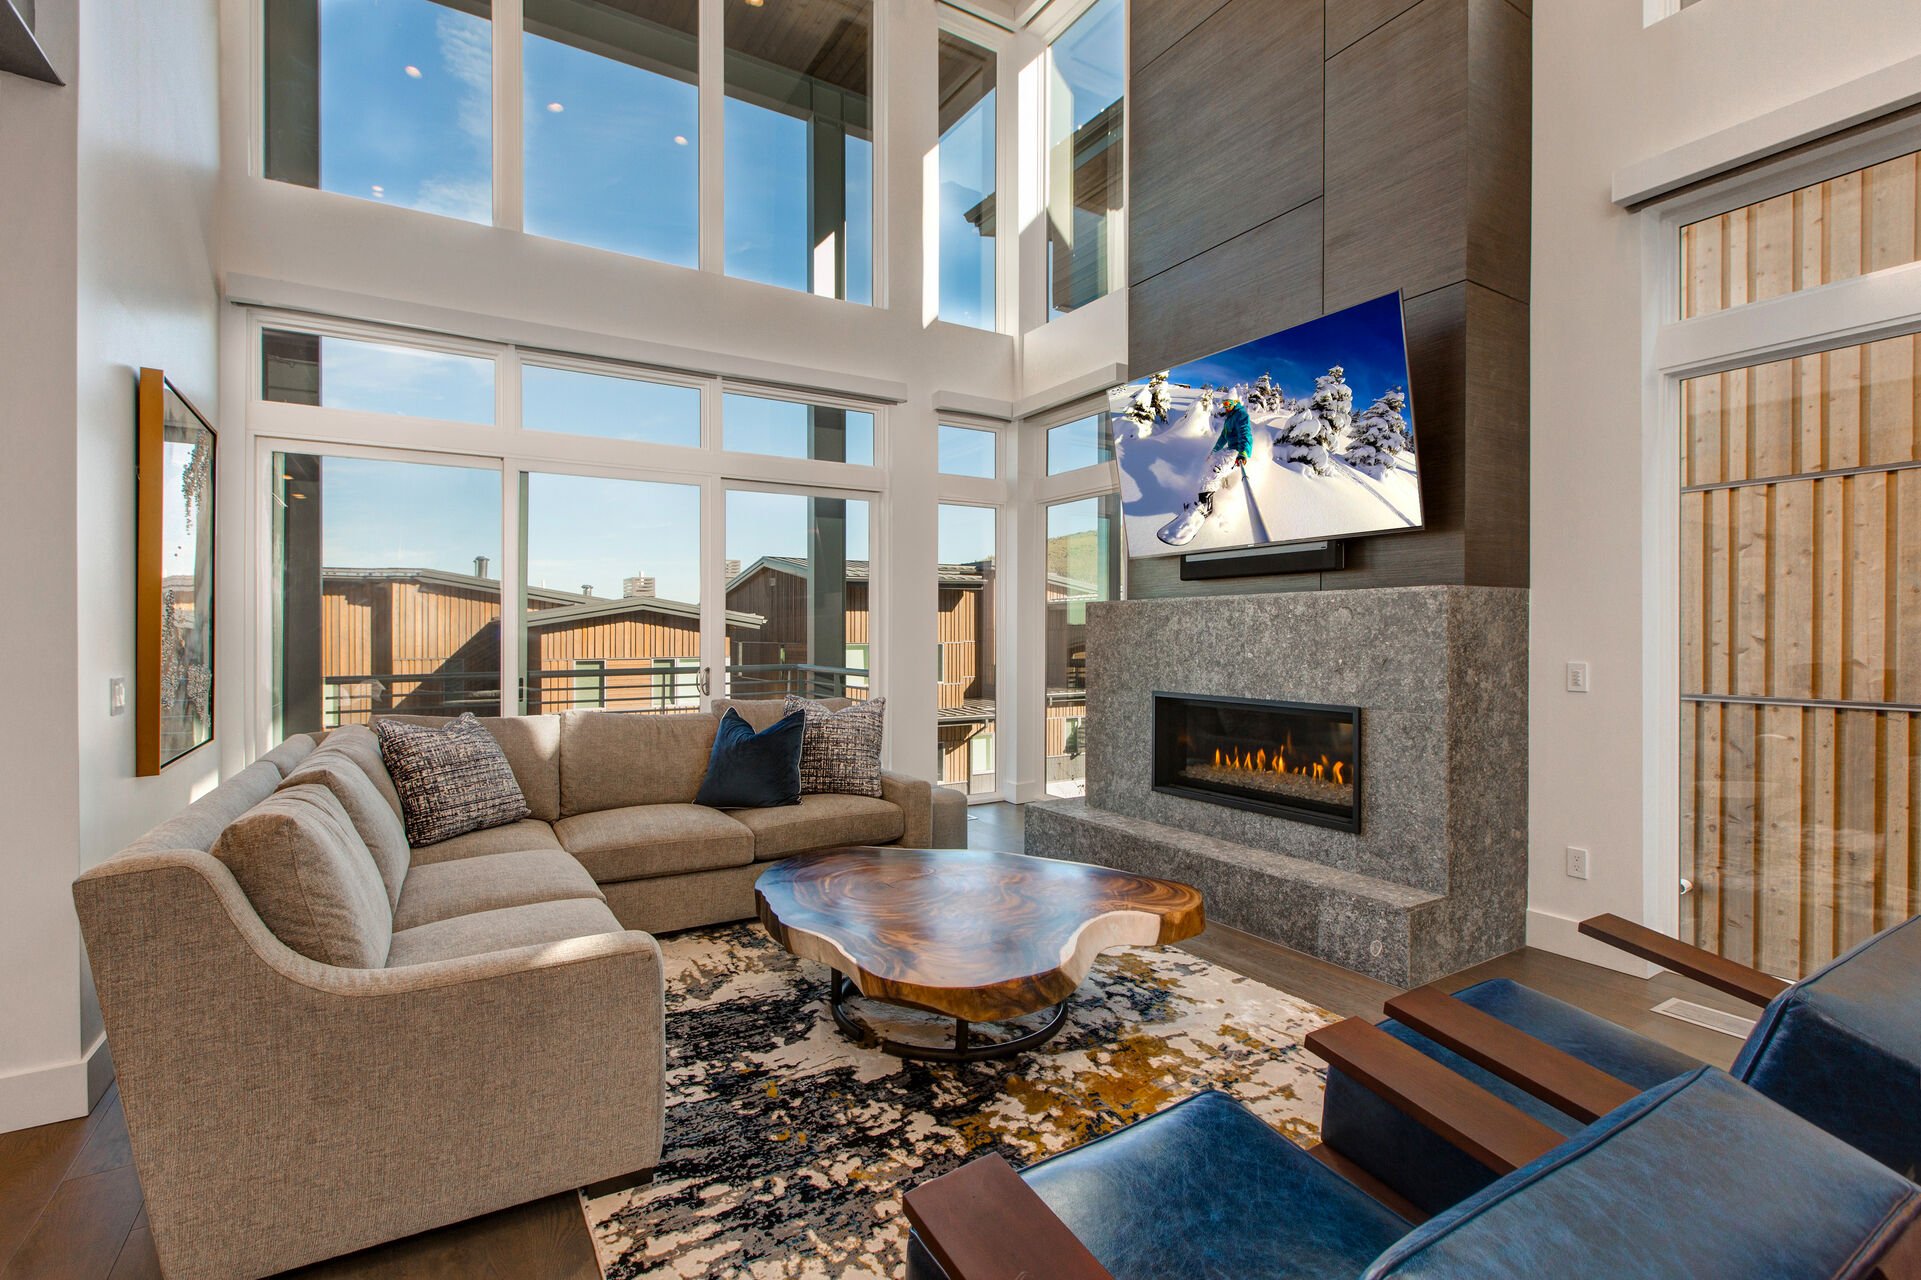 Comfortable Mountain Contemporary Furnishings, Smart TV, Gas Fireplace, and Floor-to-Ceiling Windows